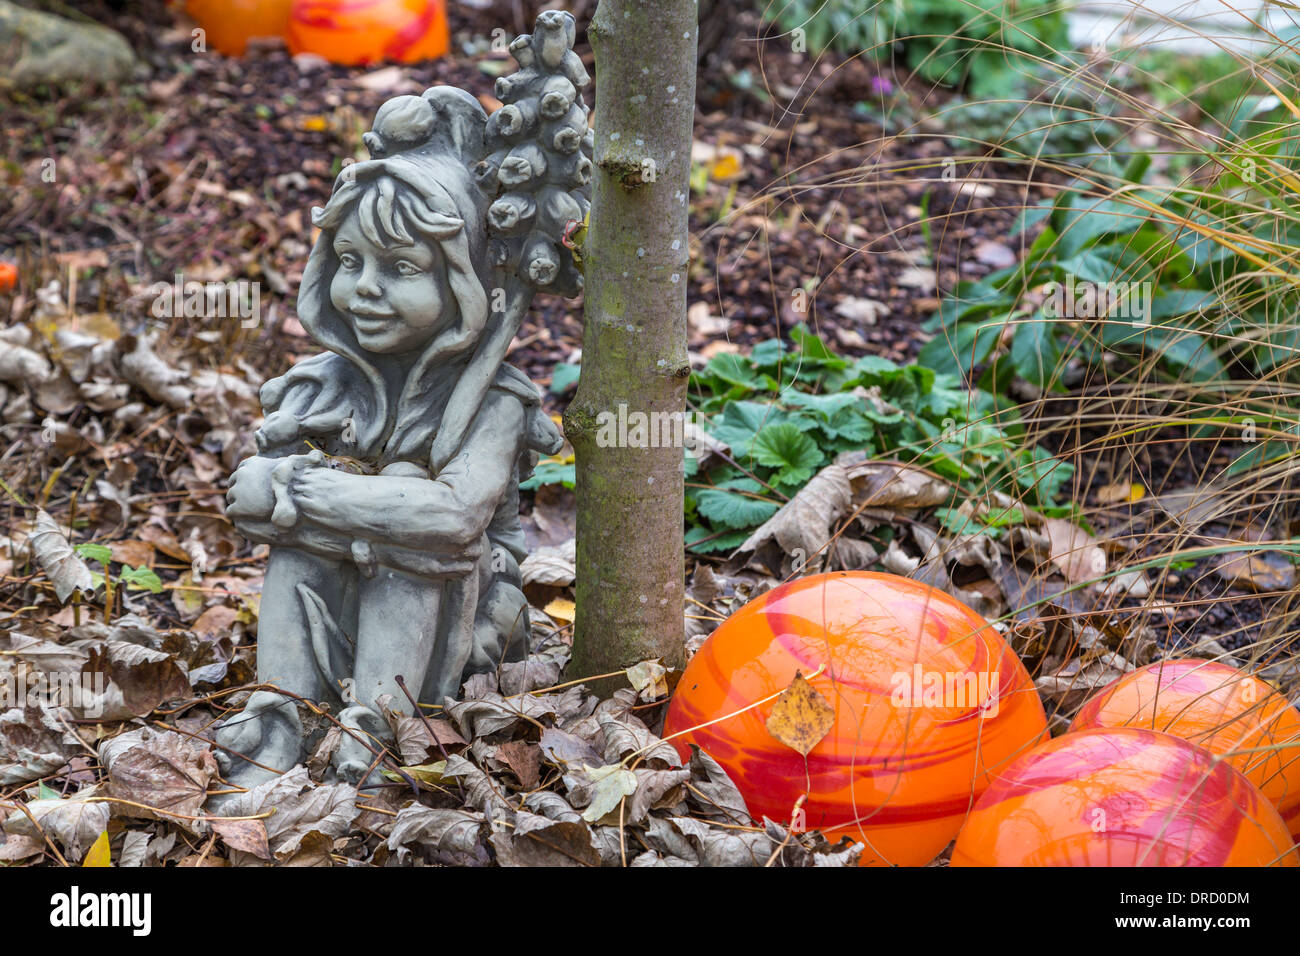 funny elves in the colorful autumn garden Stock Photo